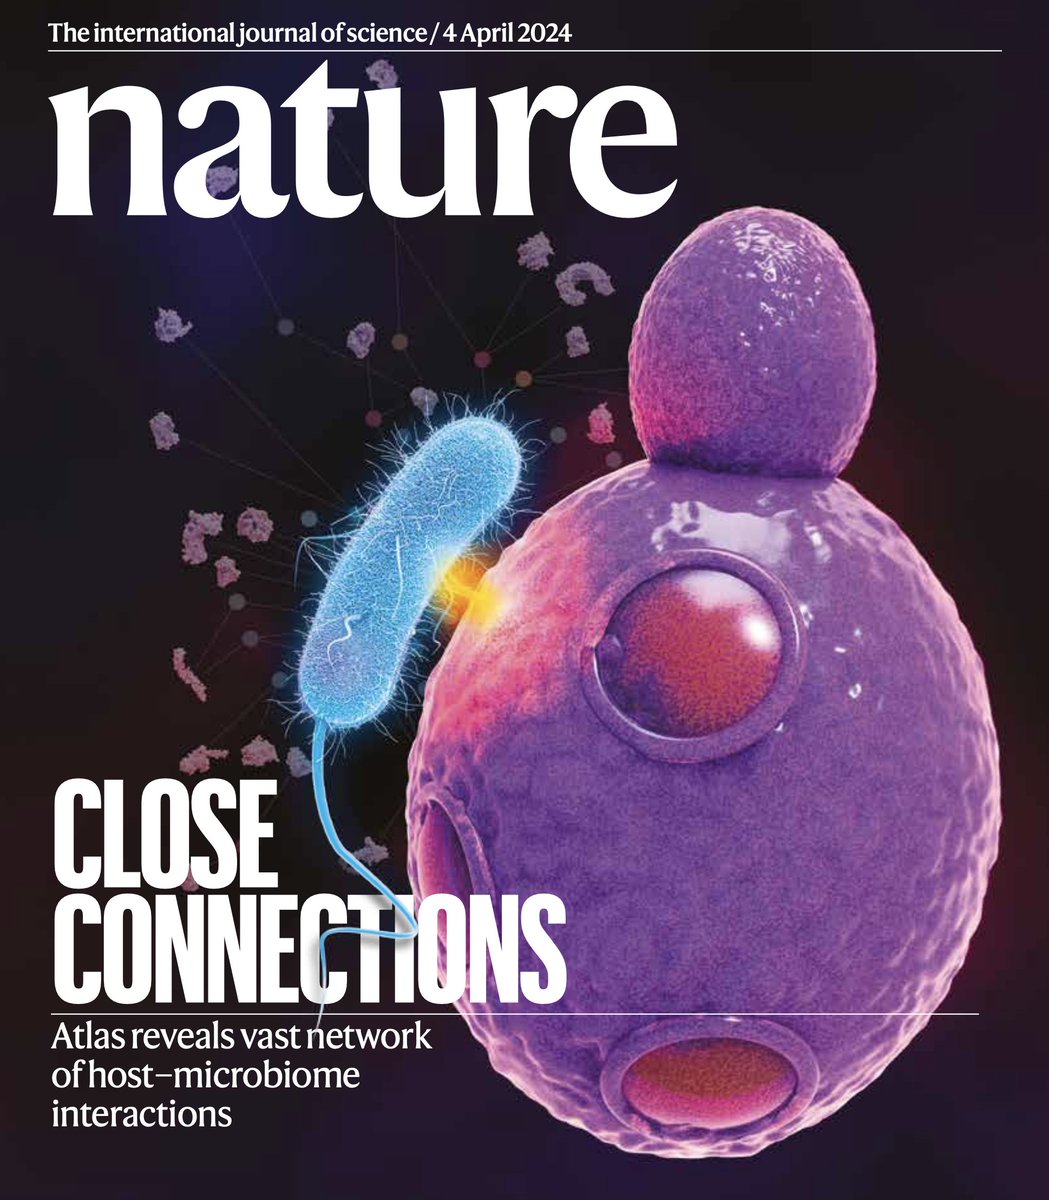 Our latest host-microbiome interactions paper has now landed on the cover of @nature. Immense shoutout to Eric Smith for transforming our research into this breathtaking image. It’s truly a symbiosis of science and art! nature.com/articles/s4158…